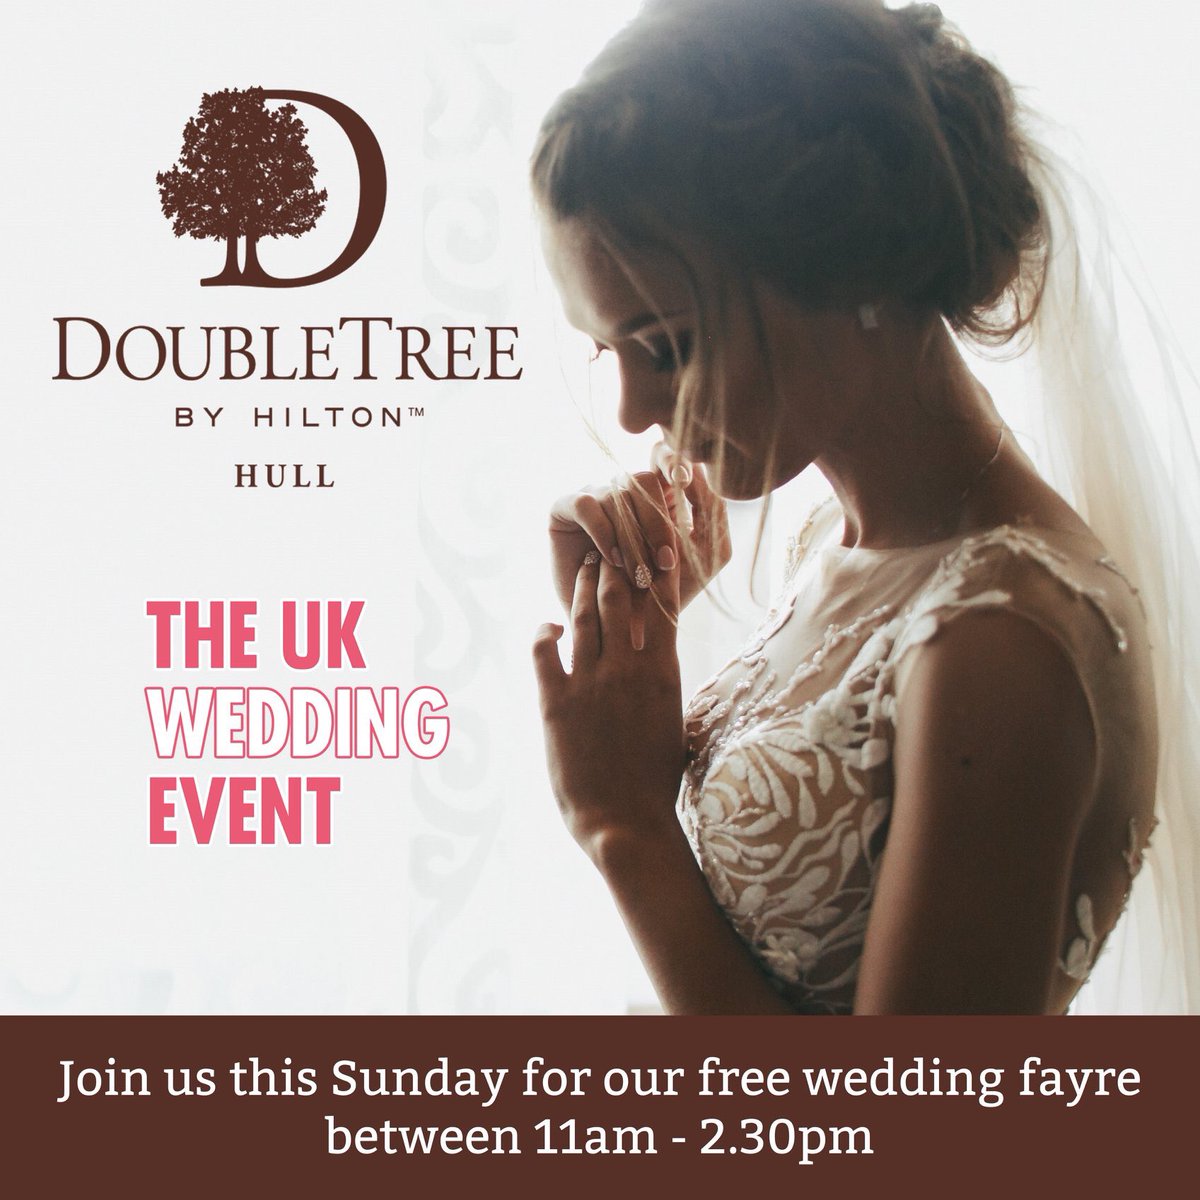 Would you like to claim one of the two remaining stands available for our wedding fayre @DoubleTreeHull on Sun?
#hairdresser #makeupartist #loveletters #venuestylist #stationery #videographer #beautyproducts #weddingplanner 
Email sales@theukweddingevent.co.uk call 0113 8214544